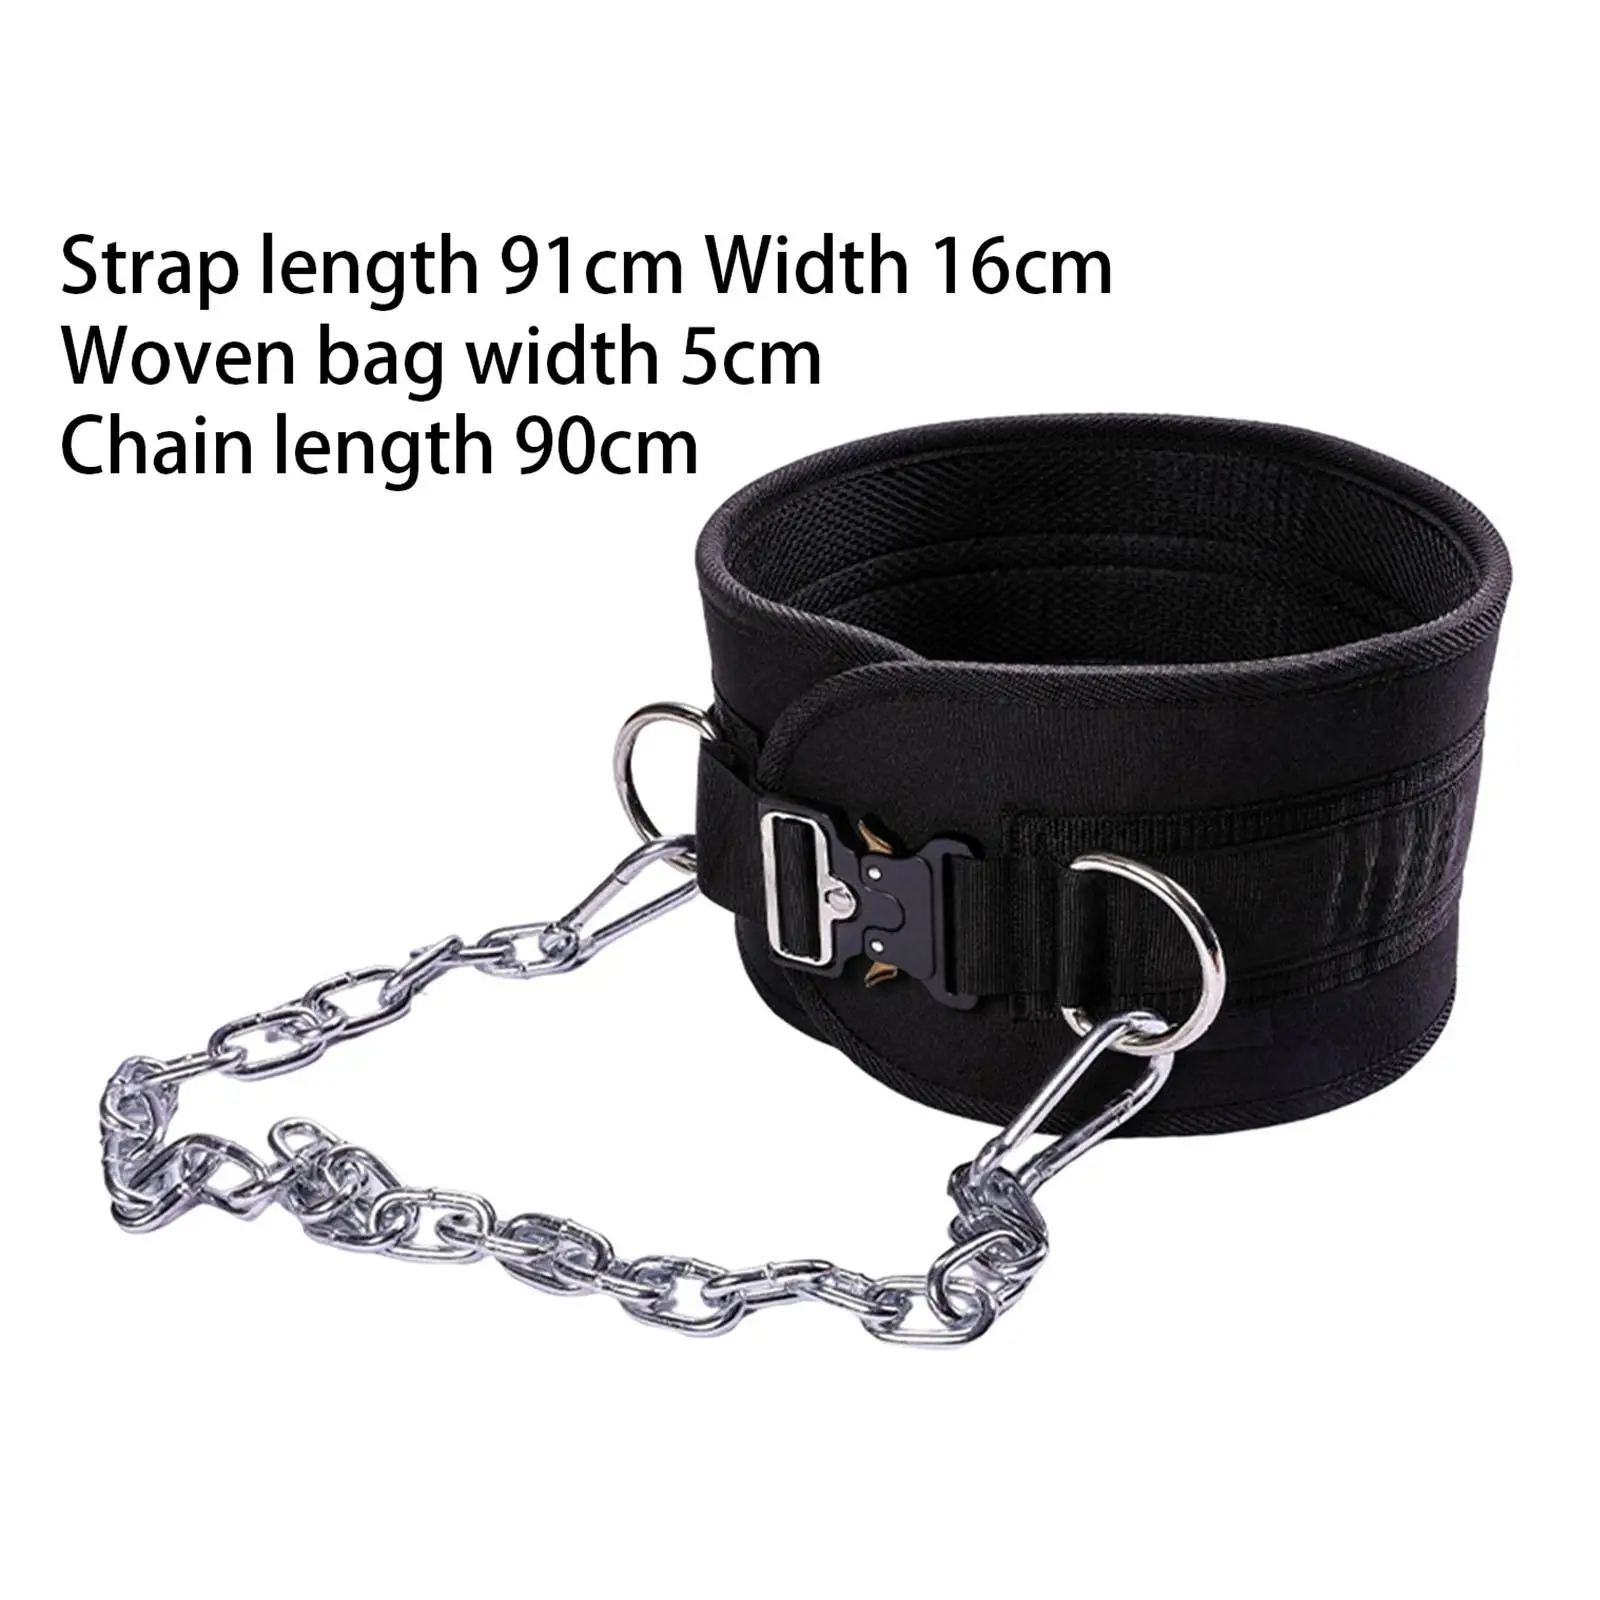 Dipping Belt for Weightlifting with Chain Waist Support Pull Ups Portable Strength Training Durable Workout Weight Lifting Belt